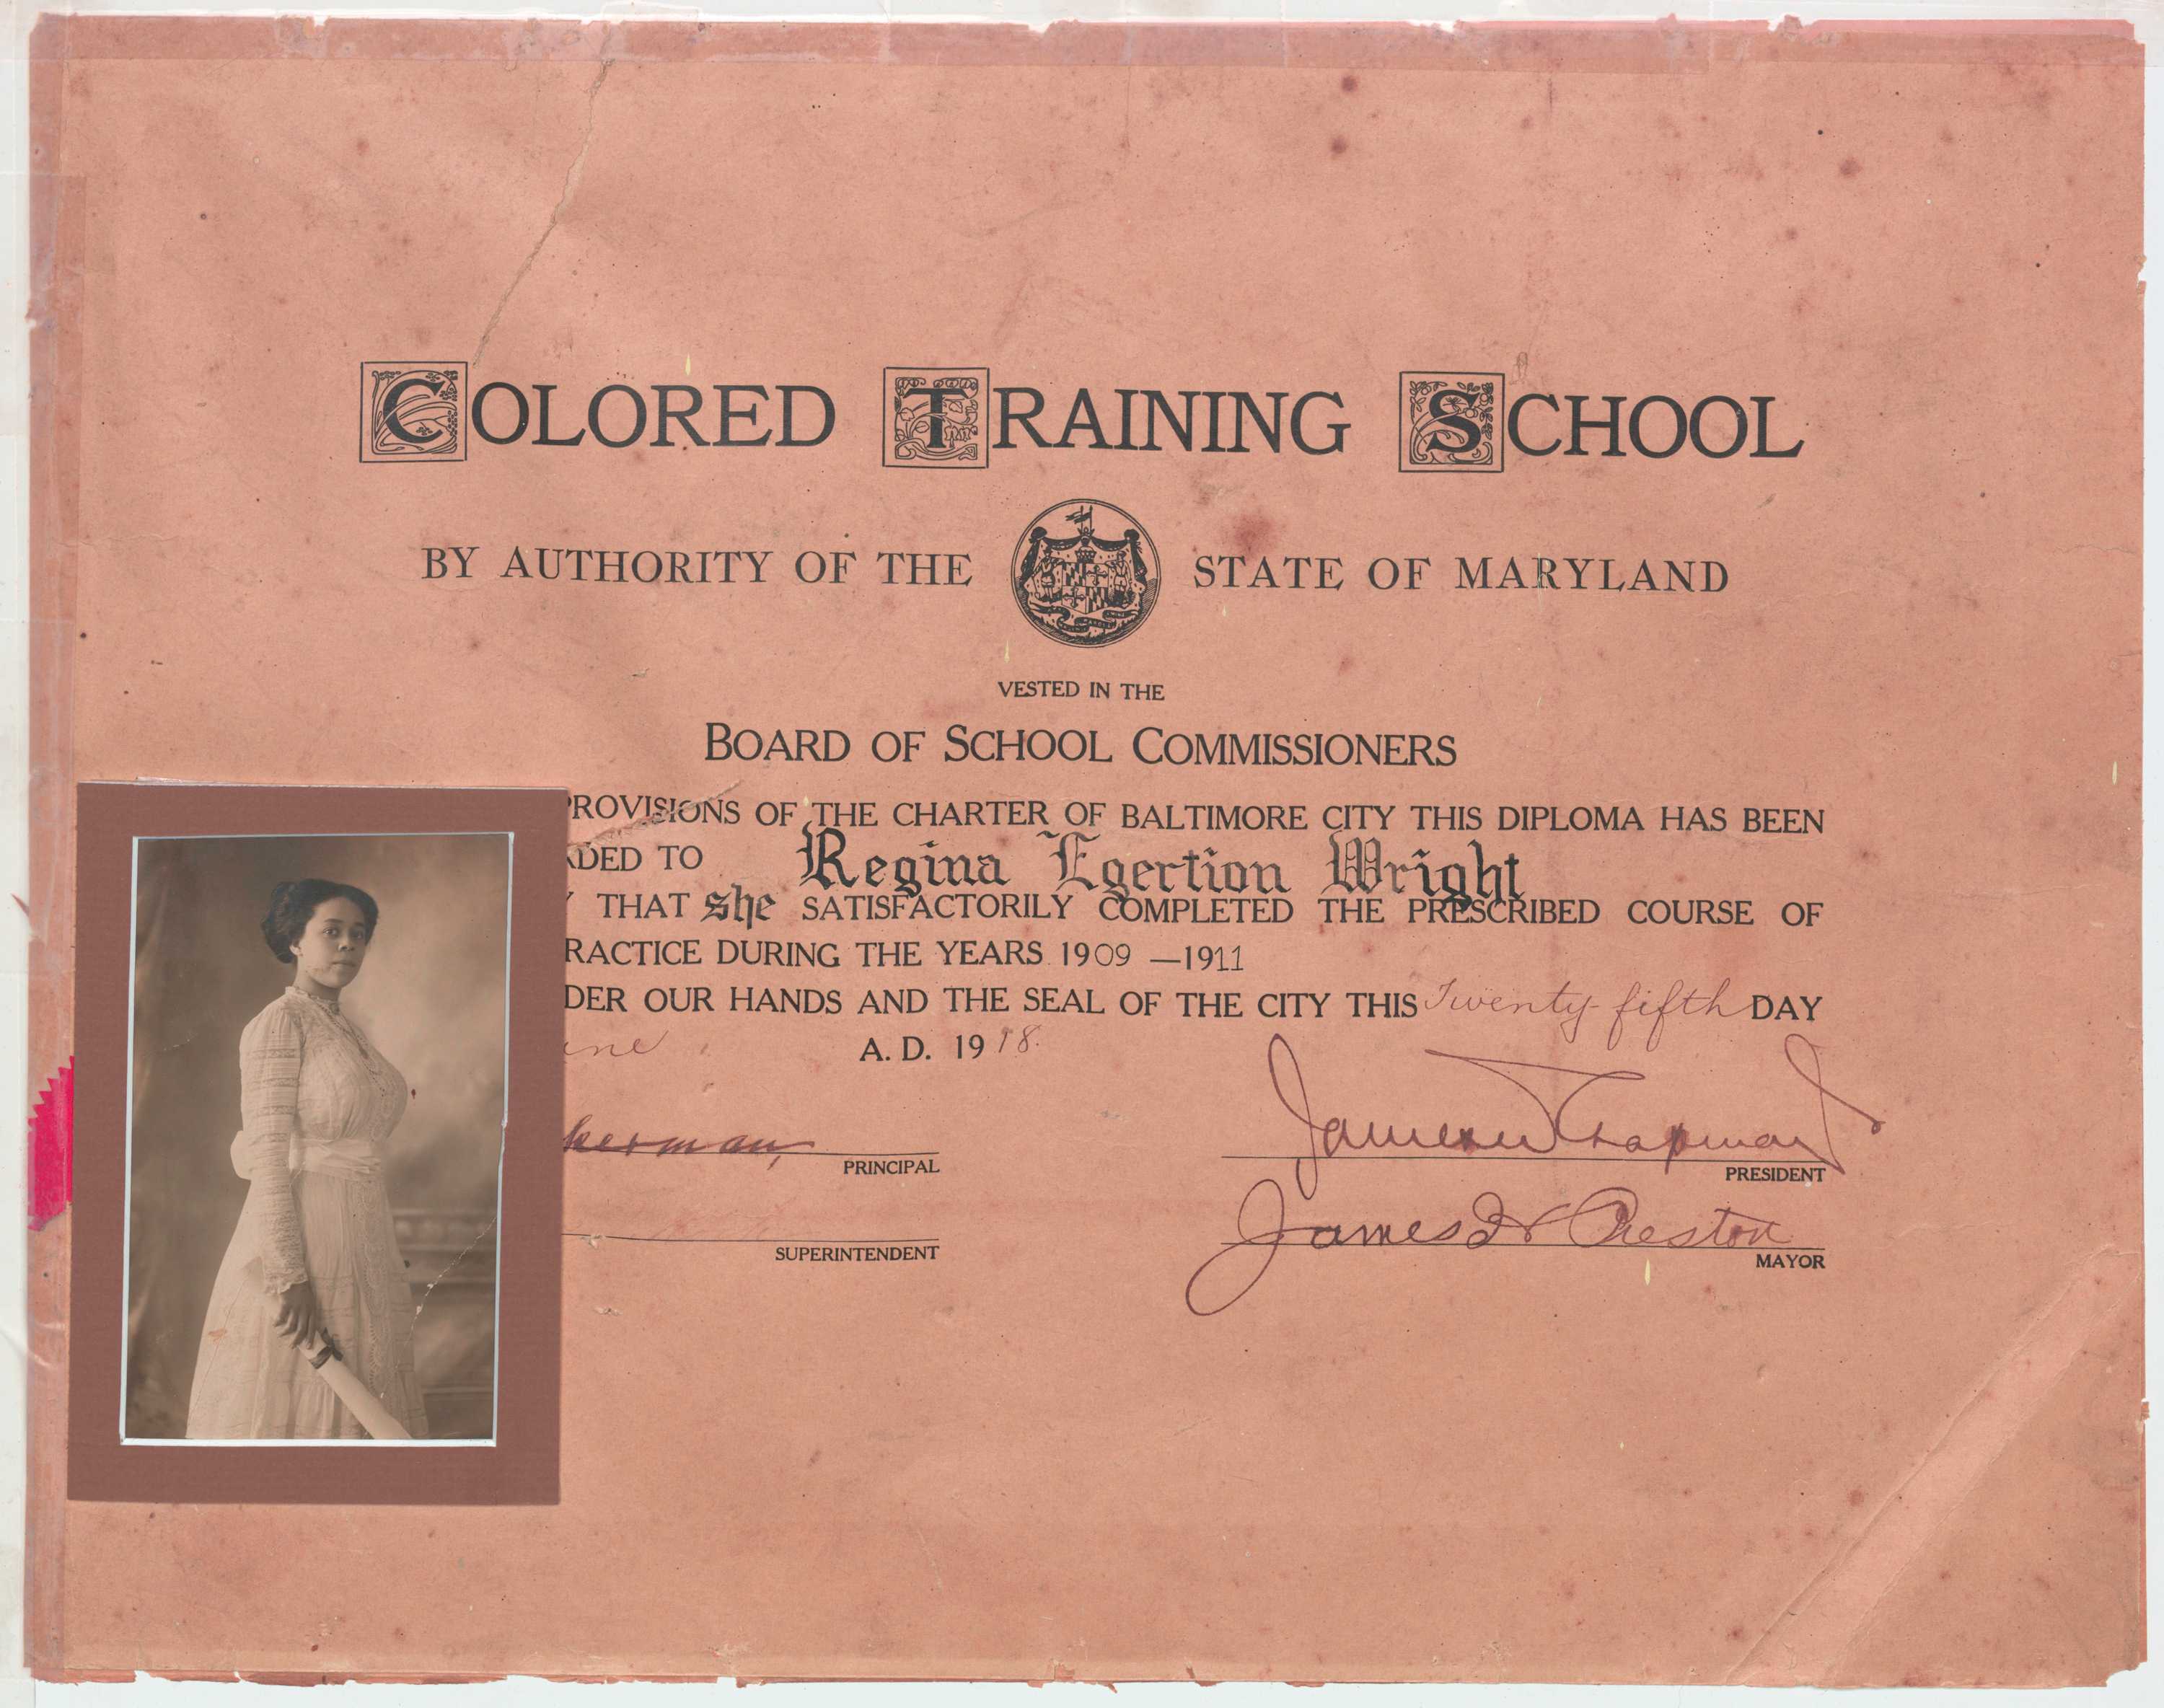 Colored Training School diploma issued to Regina Egertion Wright on June 25, 1918.